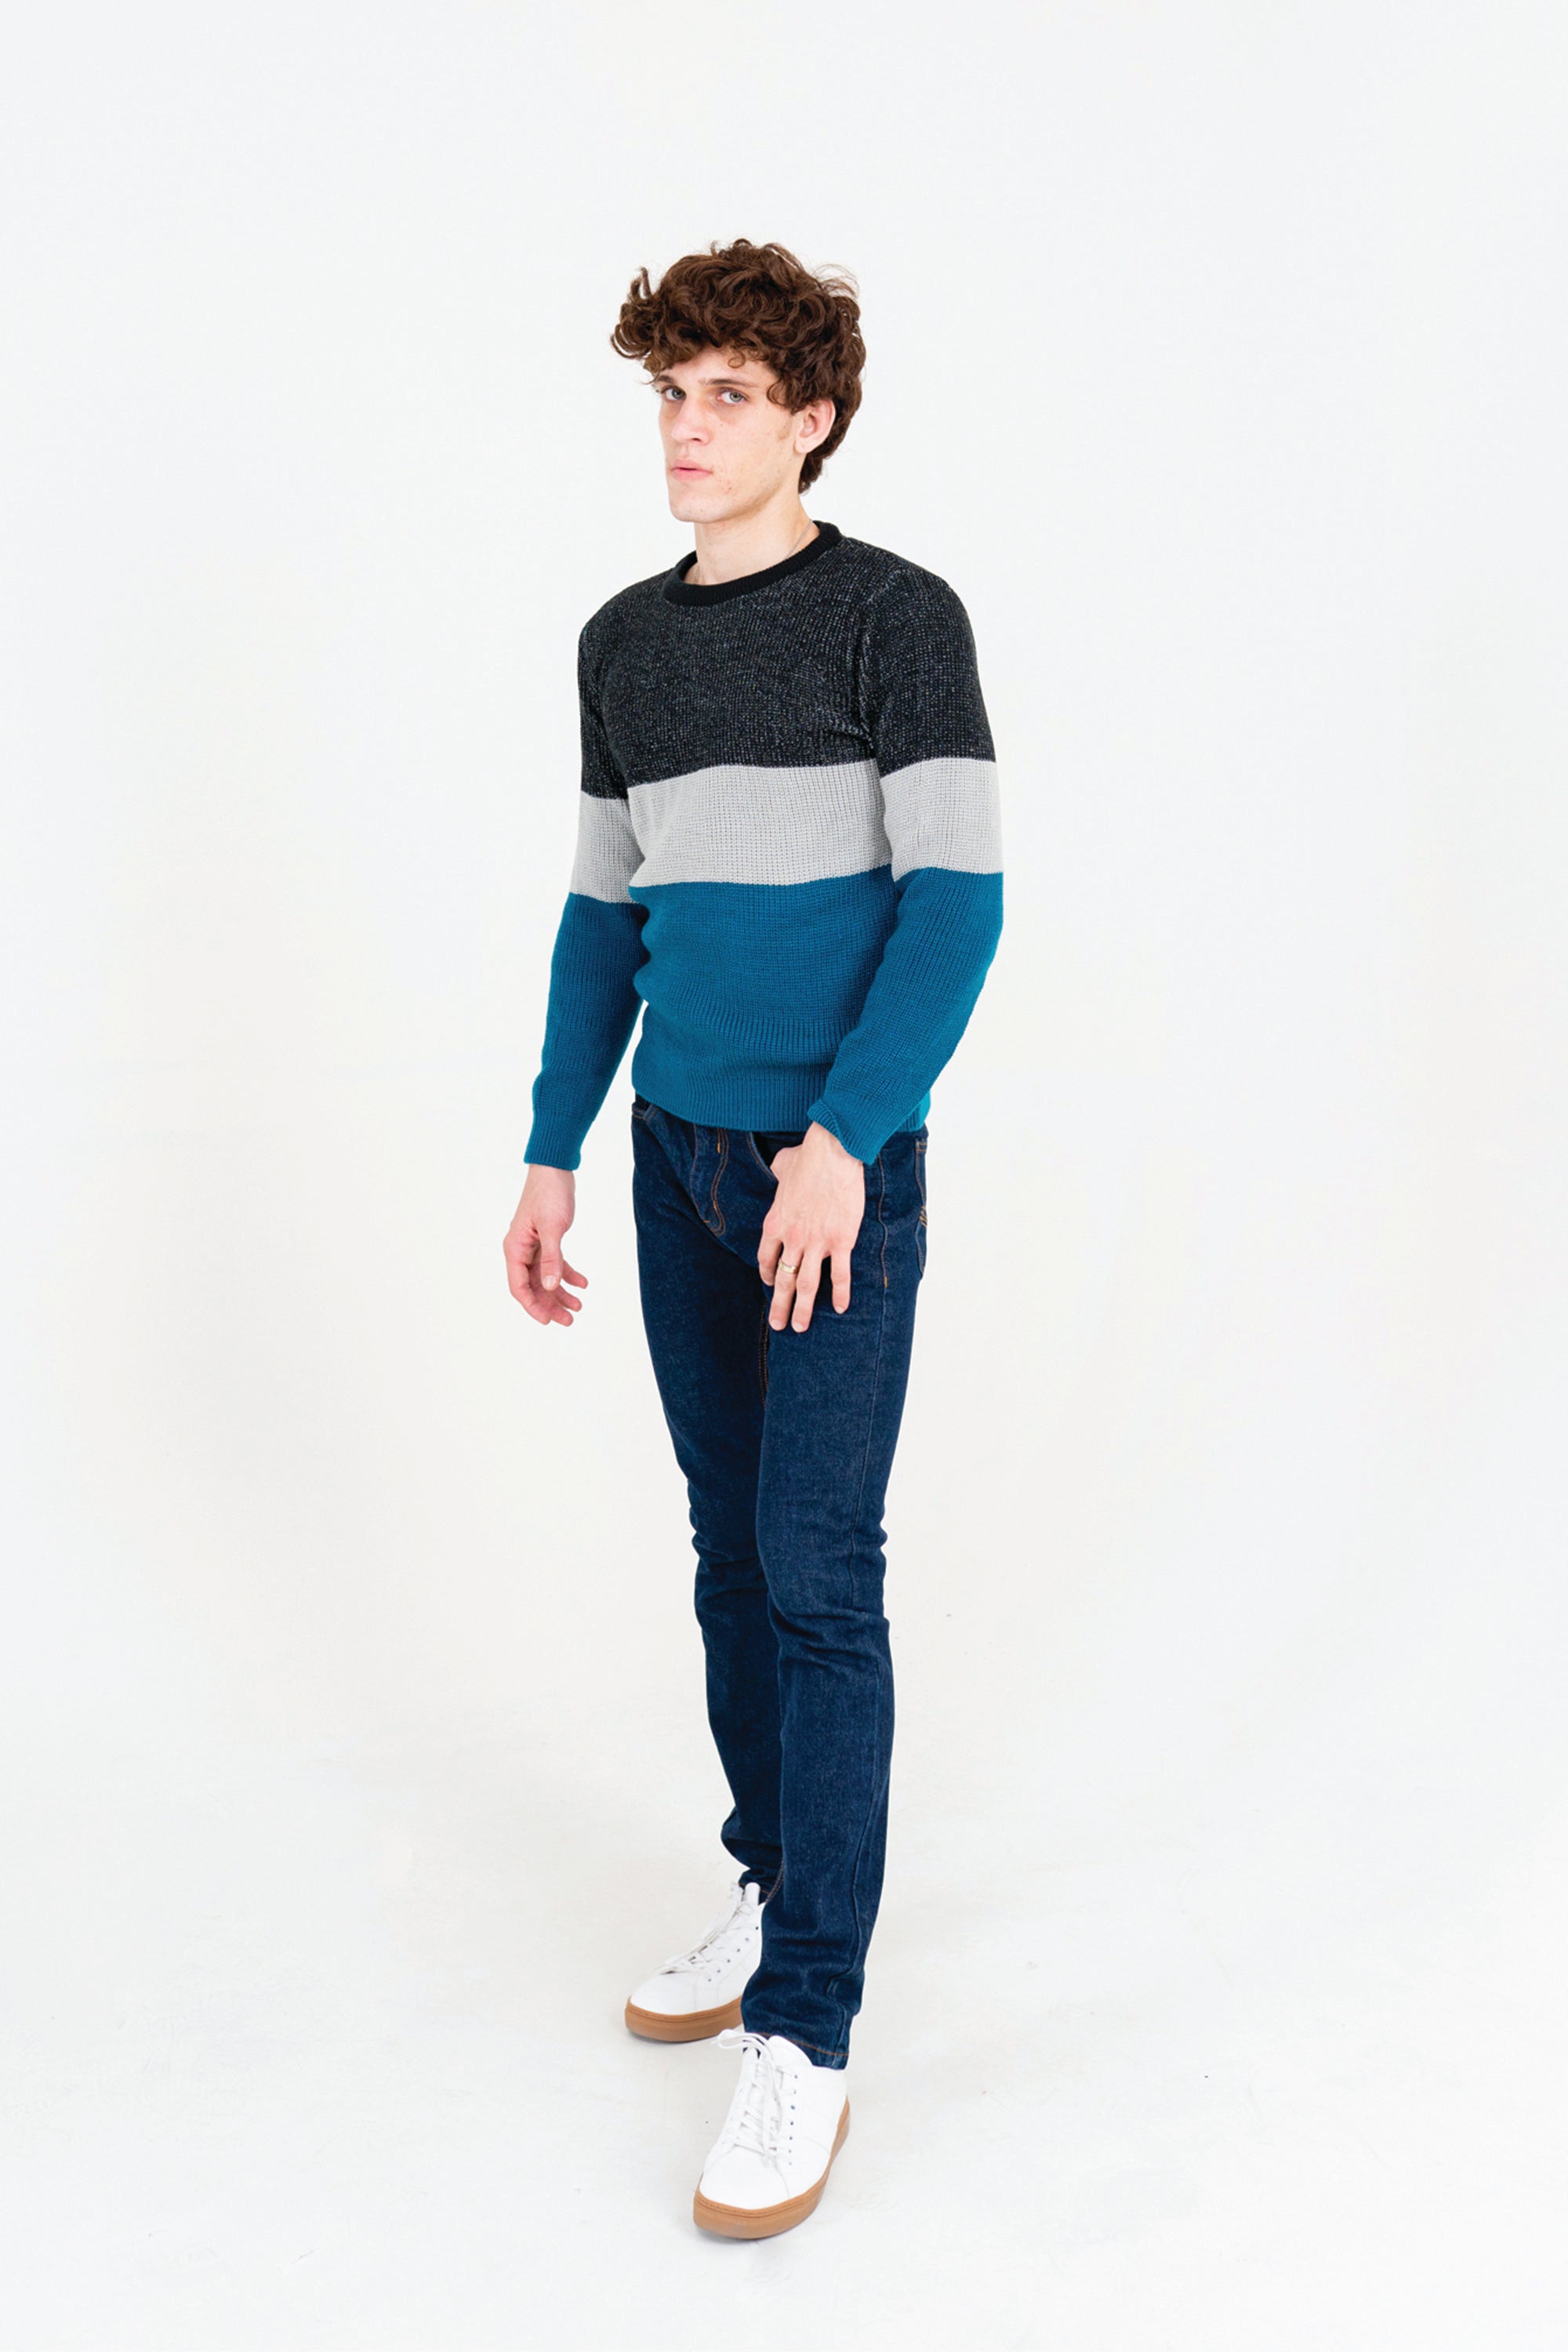 Sweater Gents R-Nk